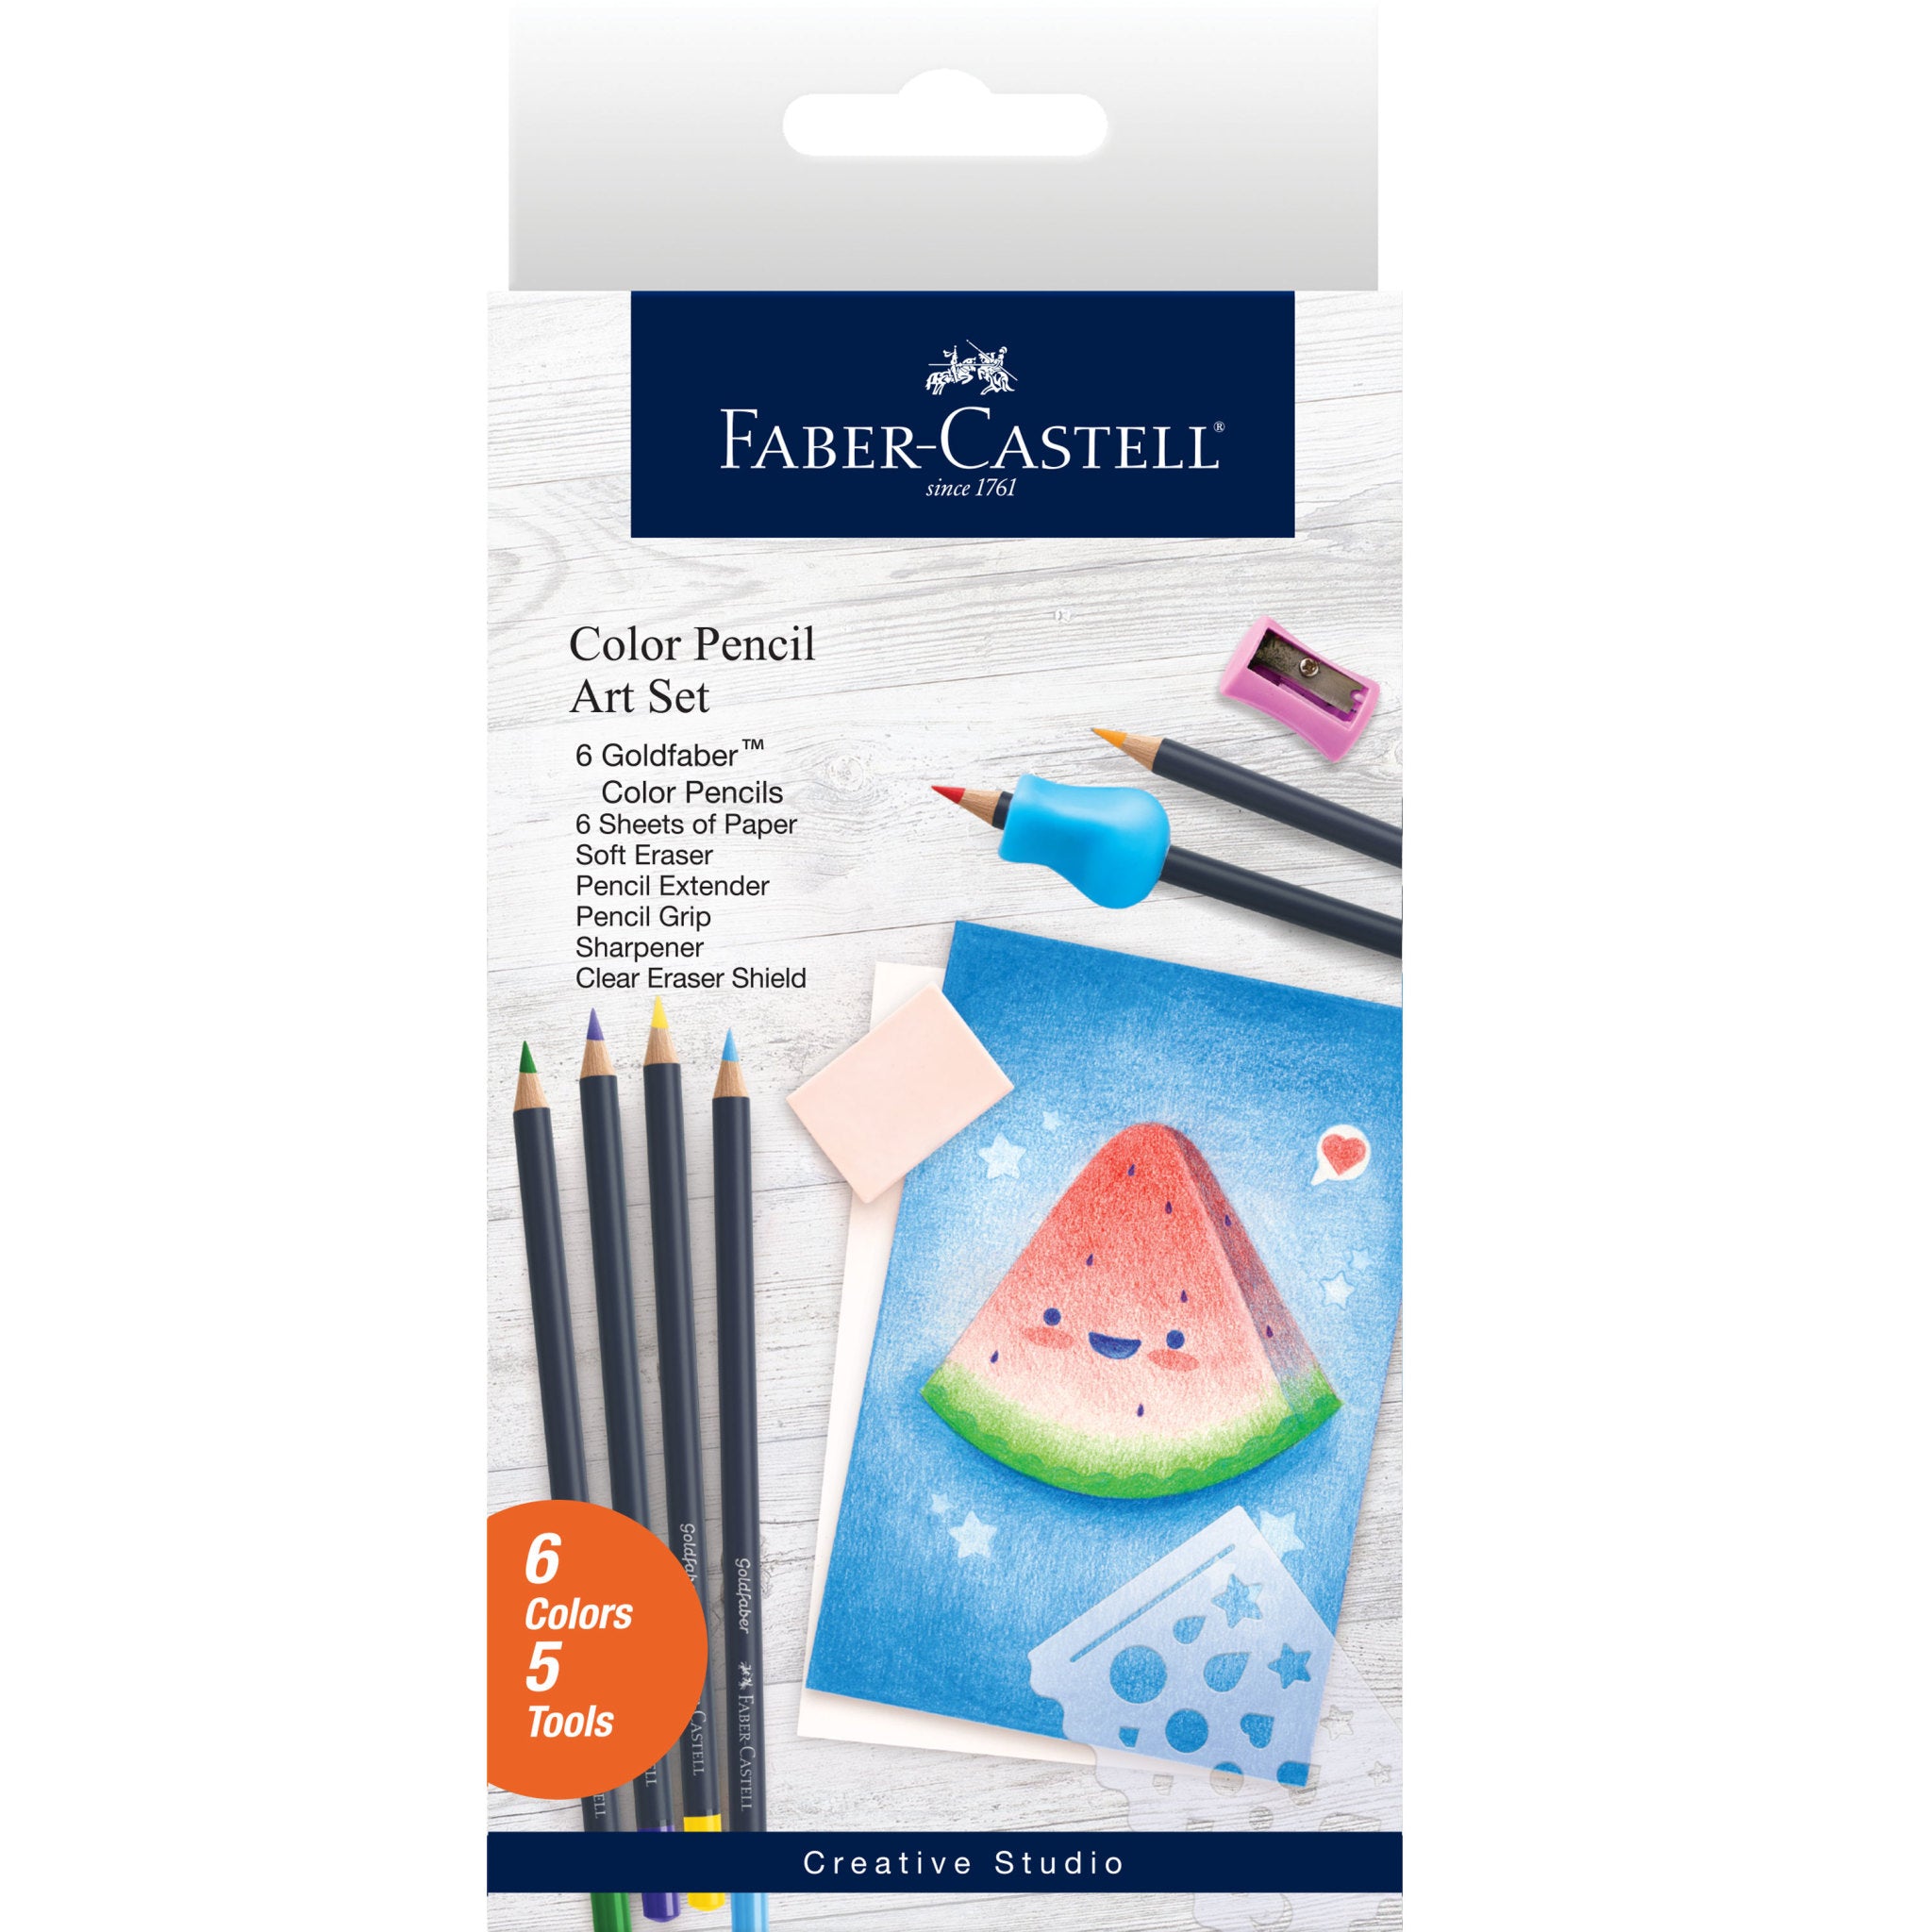 Does Your Little Artist Need a New Art Kit Royal Blue Plastic Art Kit From  Rose Art Supplies, Crayons, Oil Pastels, Color Pencils, Markers 